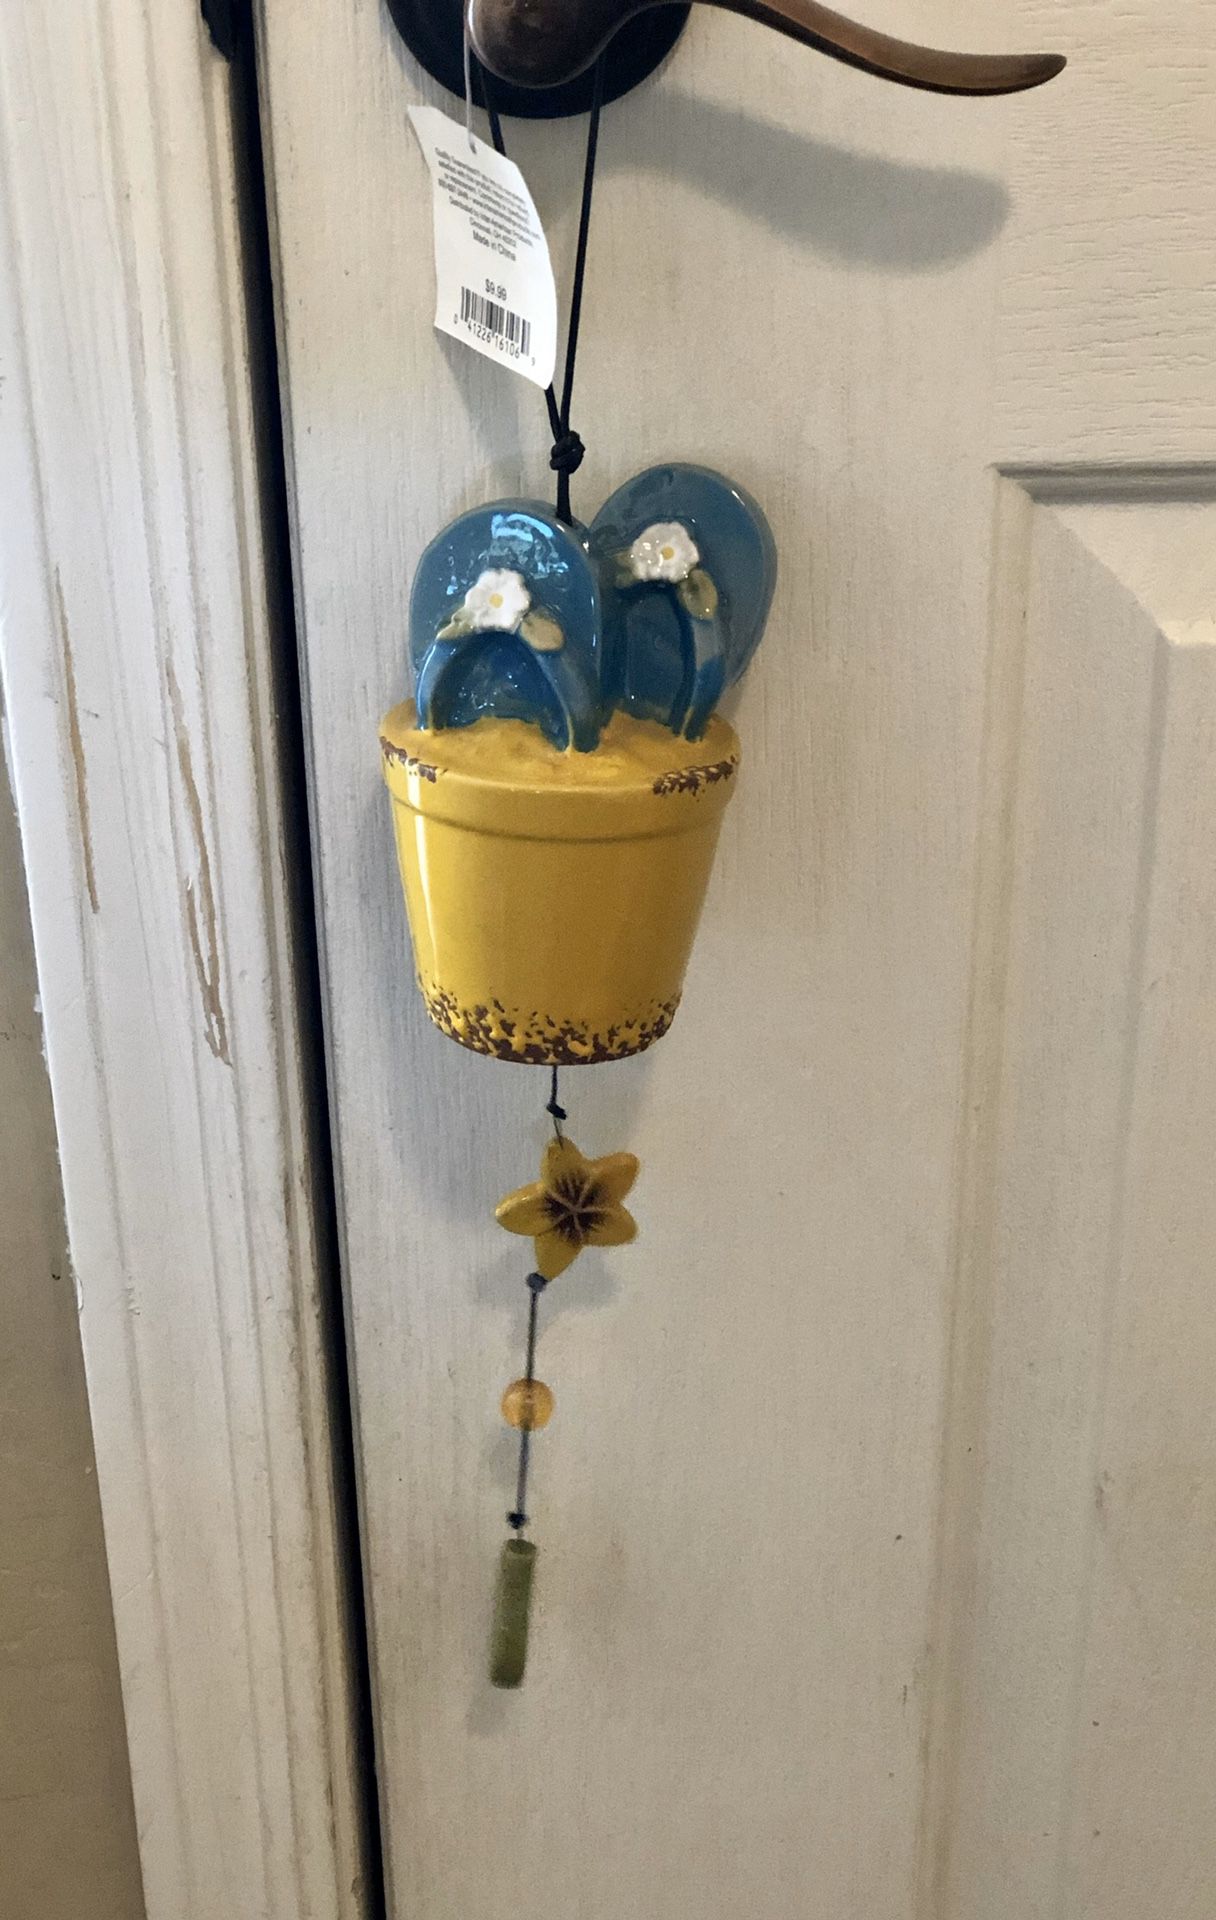 New! Cute heavy ceramic flip flop wind chimes. I have two available $8 each. Great gift!